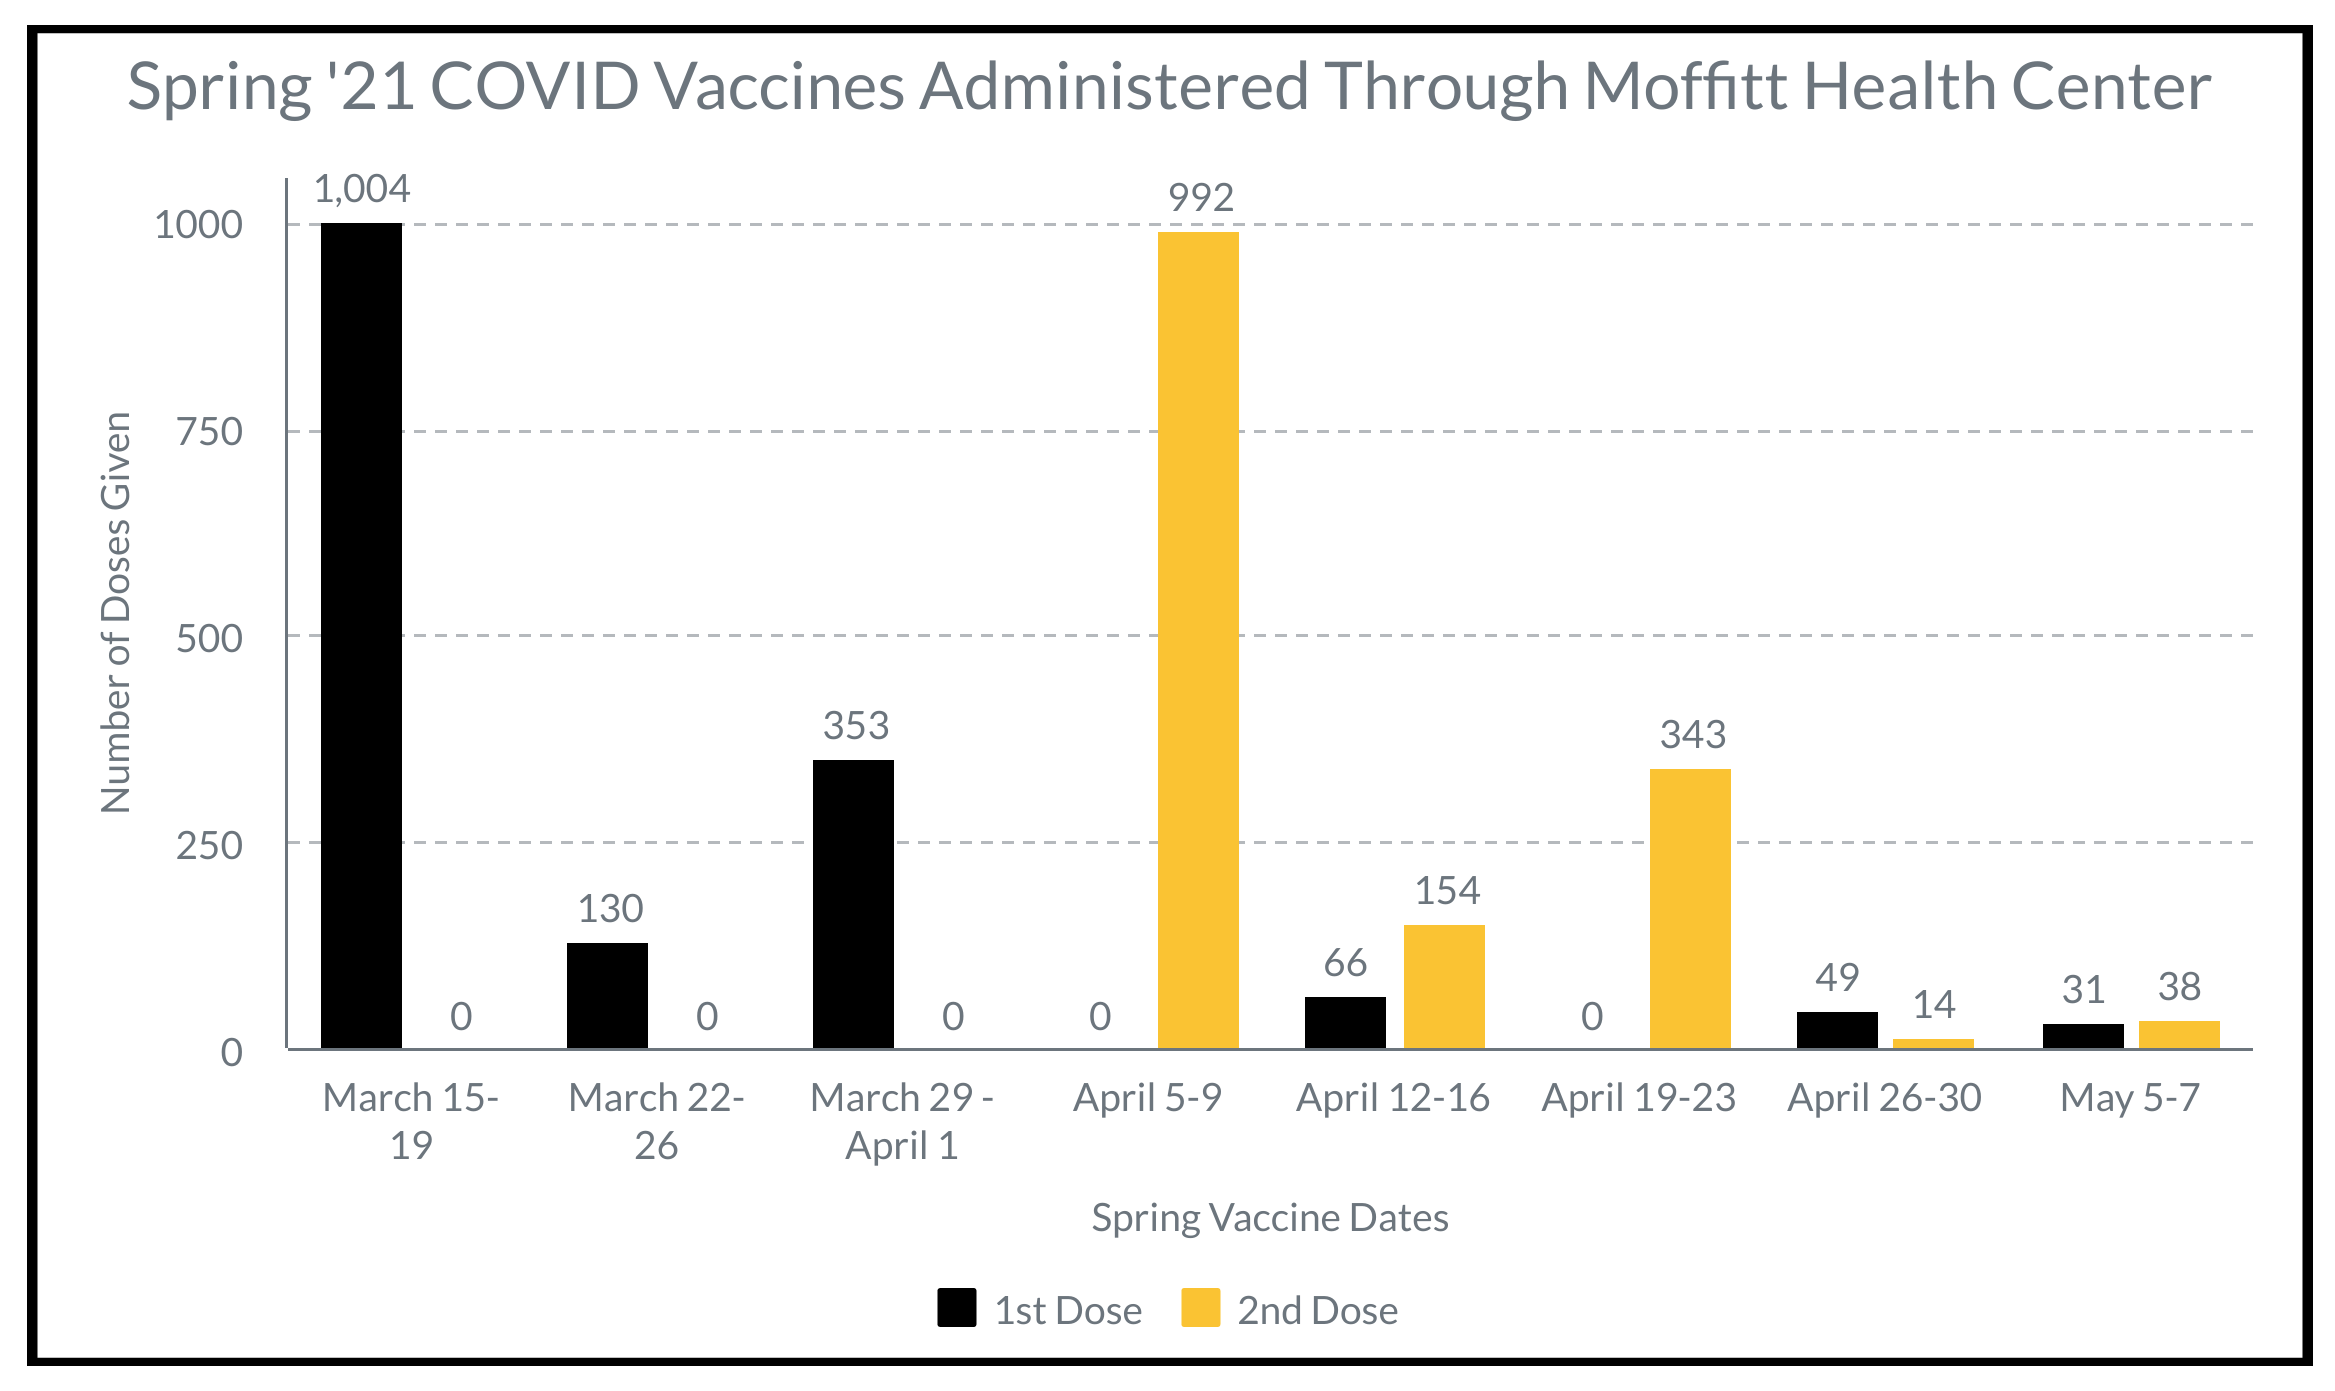 COVID Vaccines Administered at Moffitt Health Center in Spring 2021